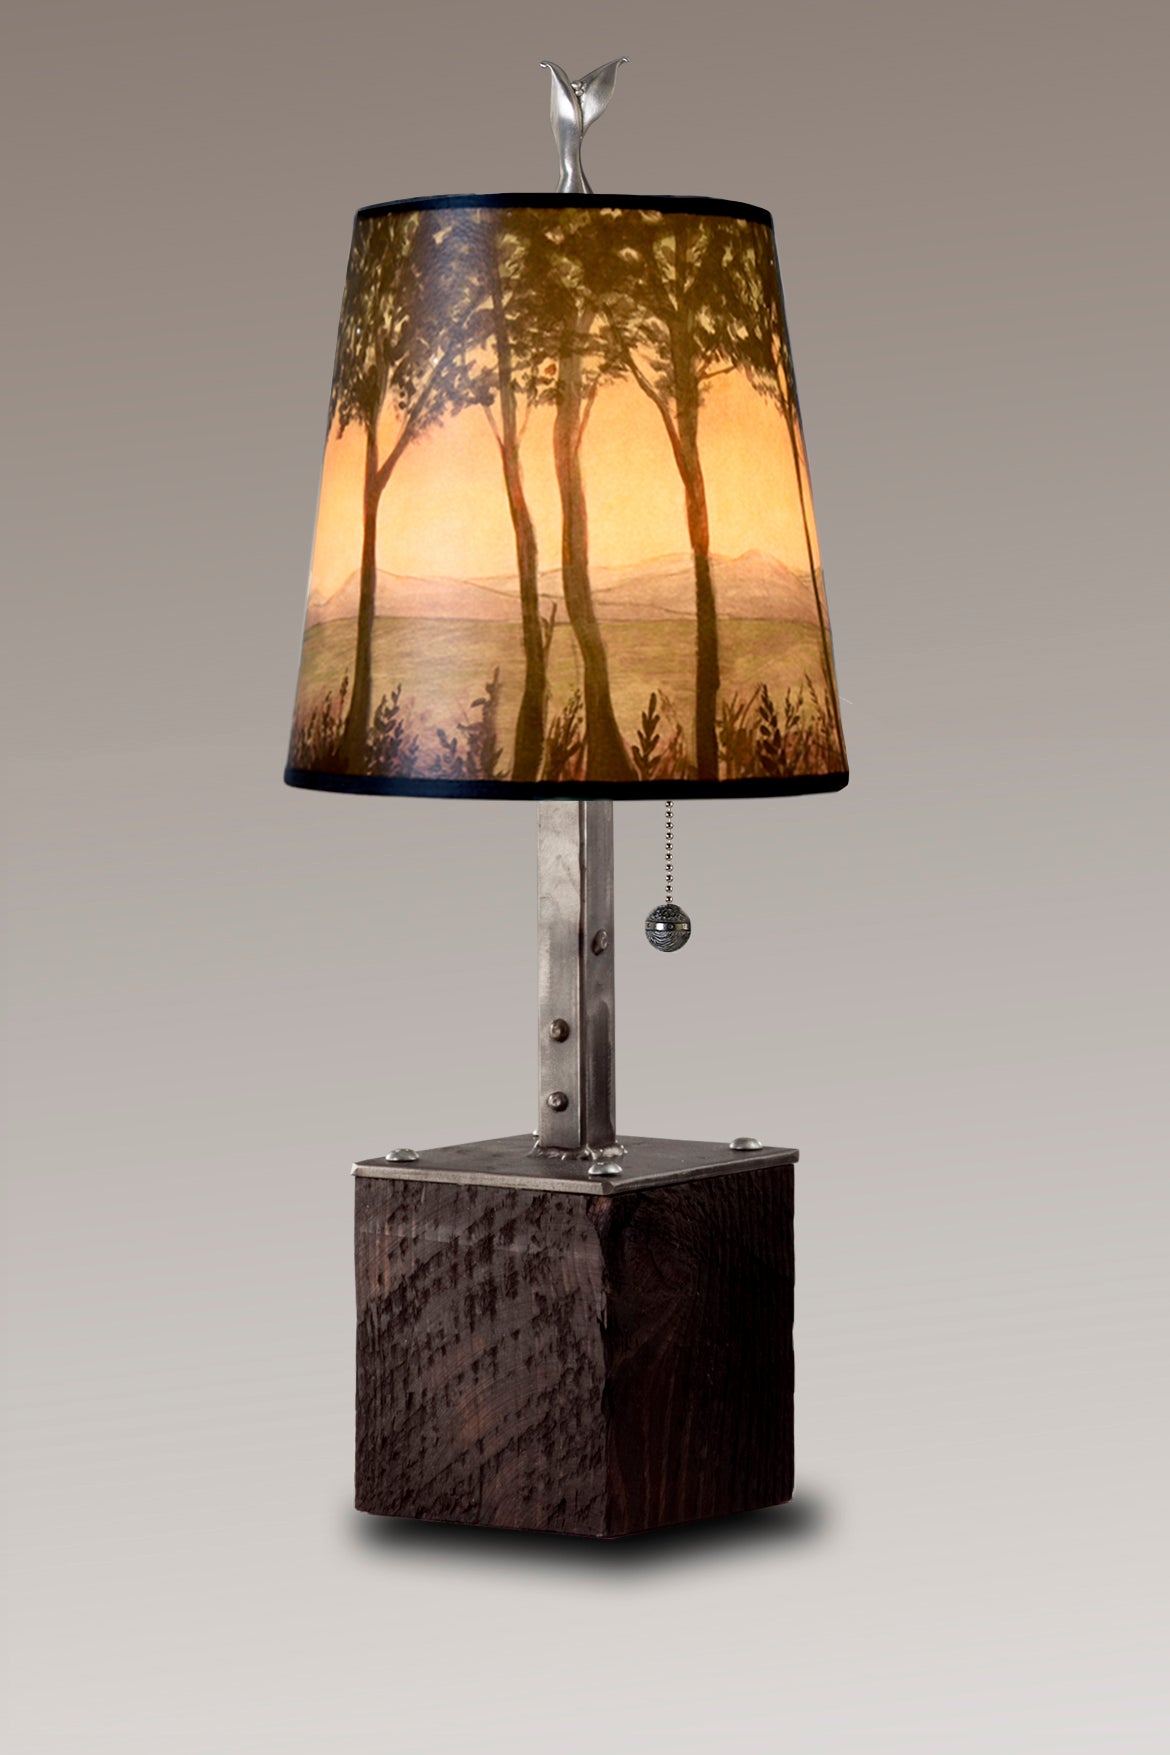 Janna Ugone &amp; Co Table Lamps Steel Table Lamp on Reclaimed Wood with Small Drum Shade in Dawn